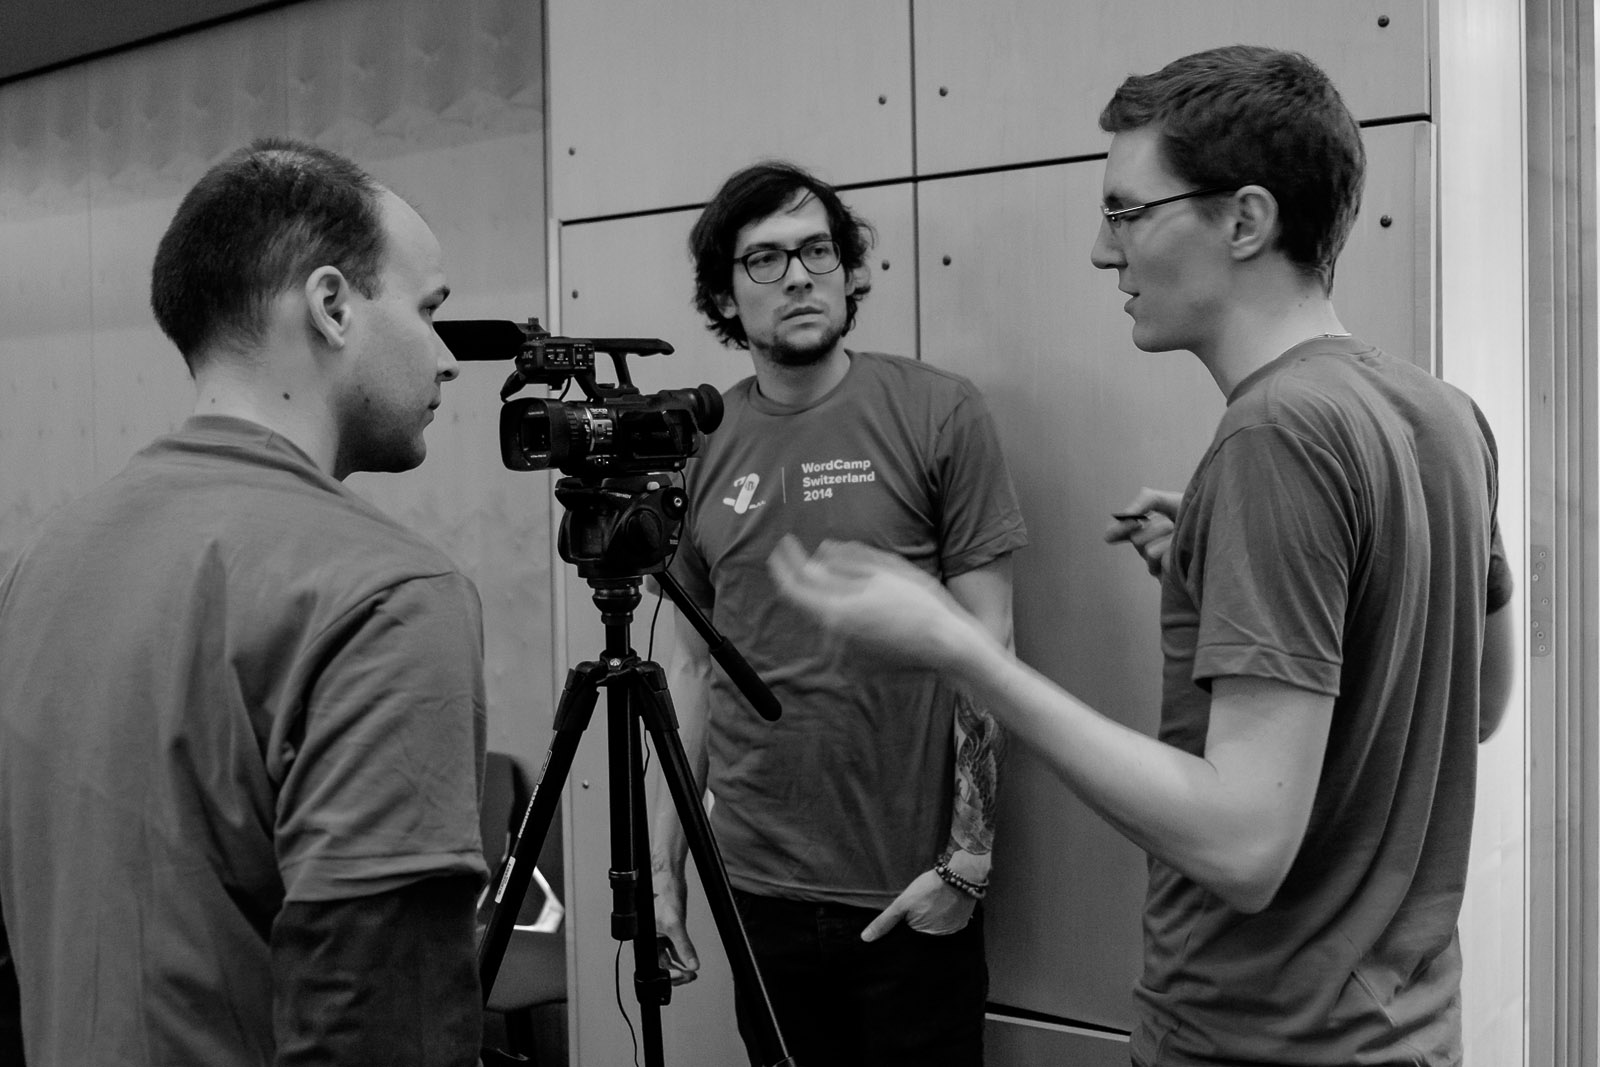 @michael_herb, @claudehagen and @pandulu are preparing equipment to capture all of #wcch's talks on video.